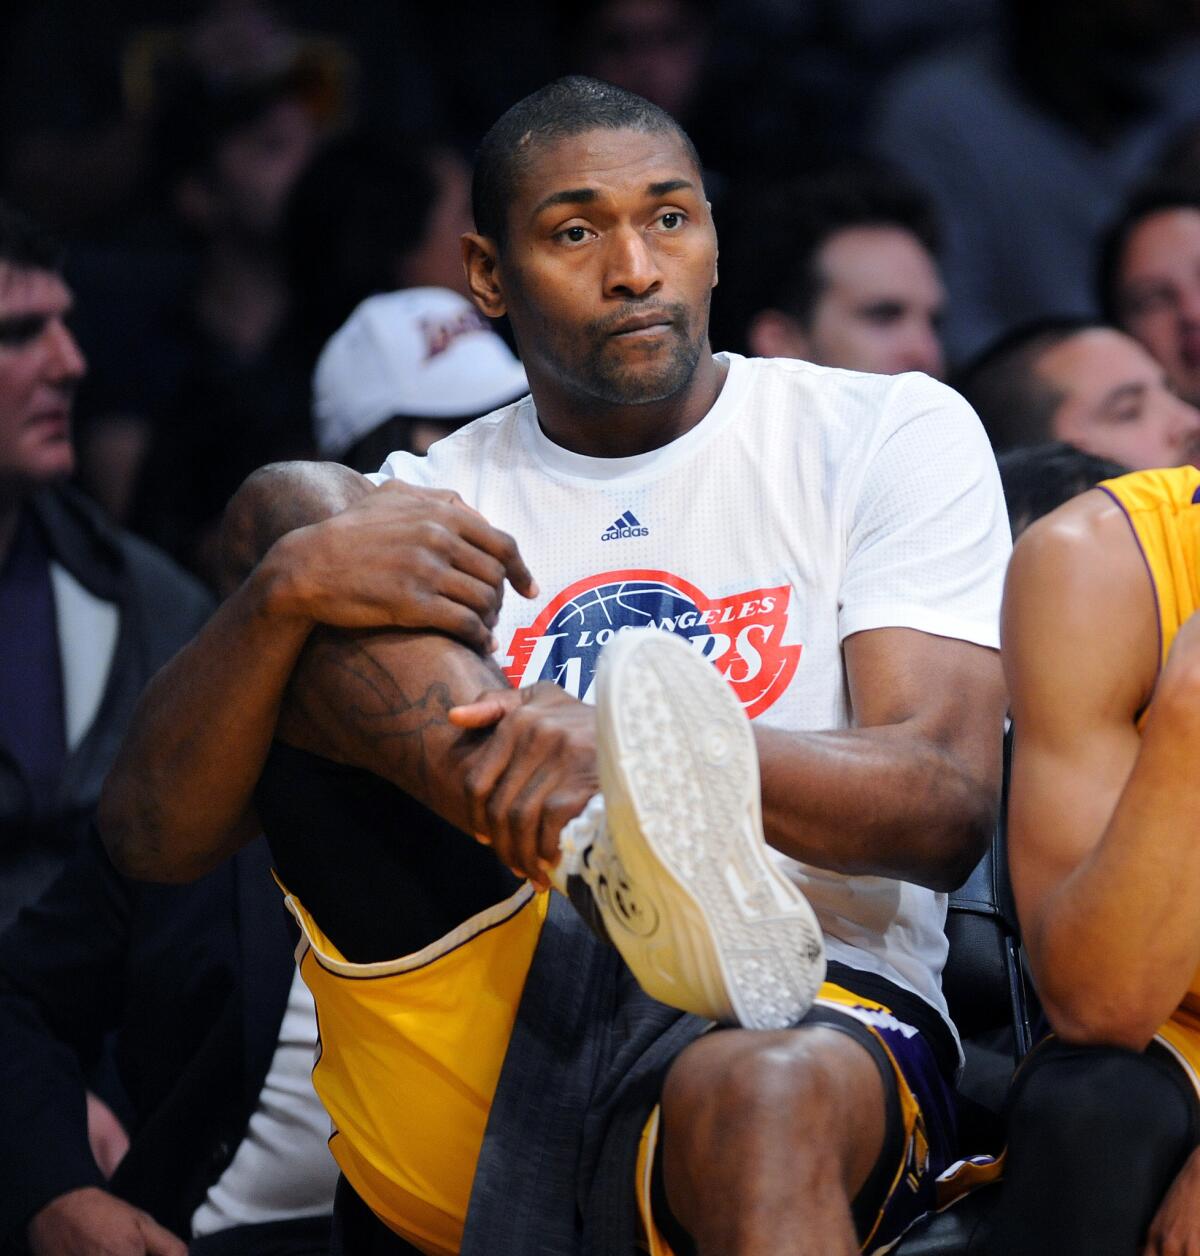 Metta World Peace stretches his legs on the bench during the fourth quarter of the Lakers' loss to the Denver Nuggets, 120-109, at Staples Center on Nov. 3.